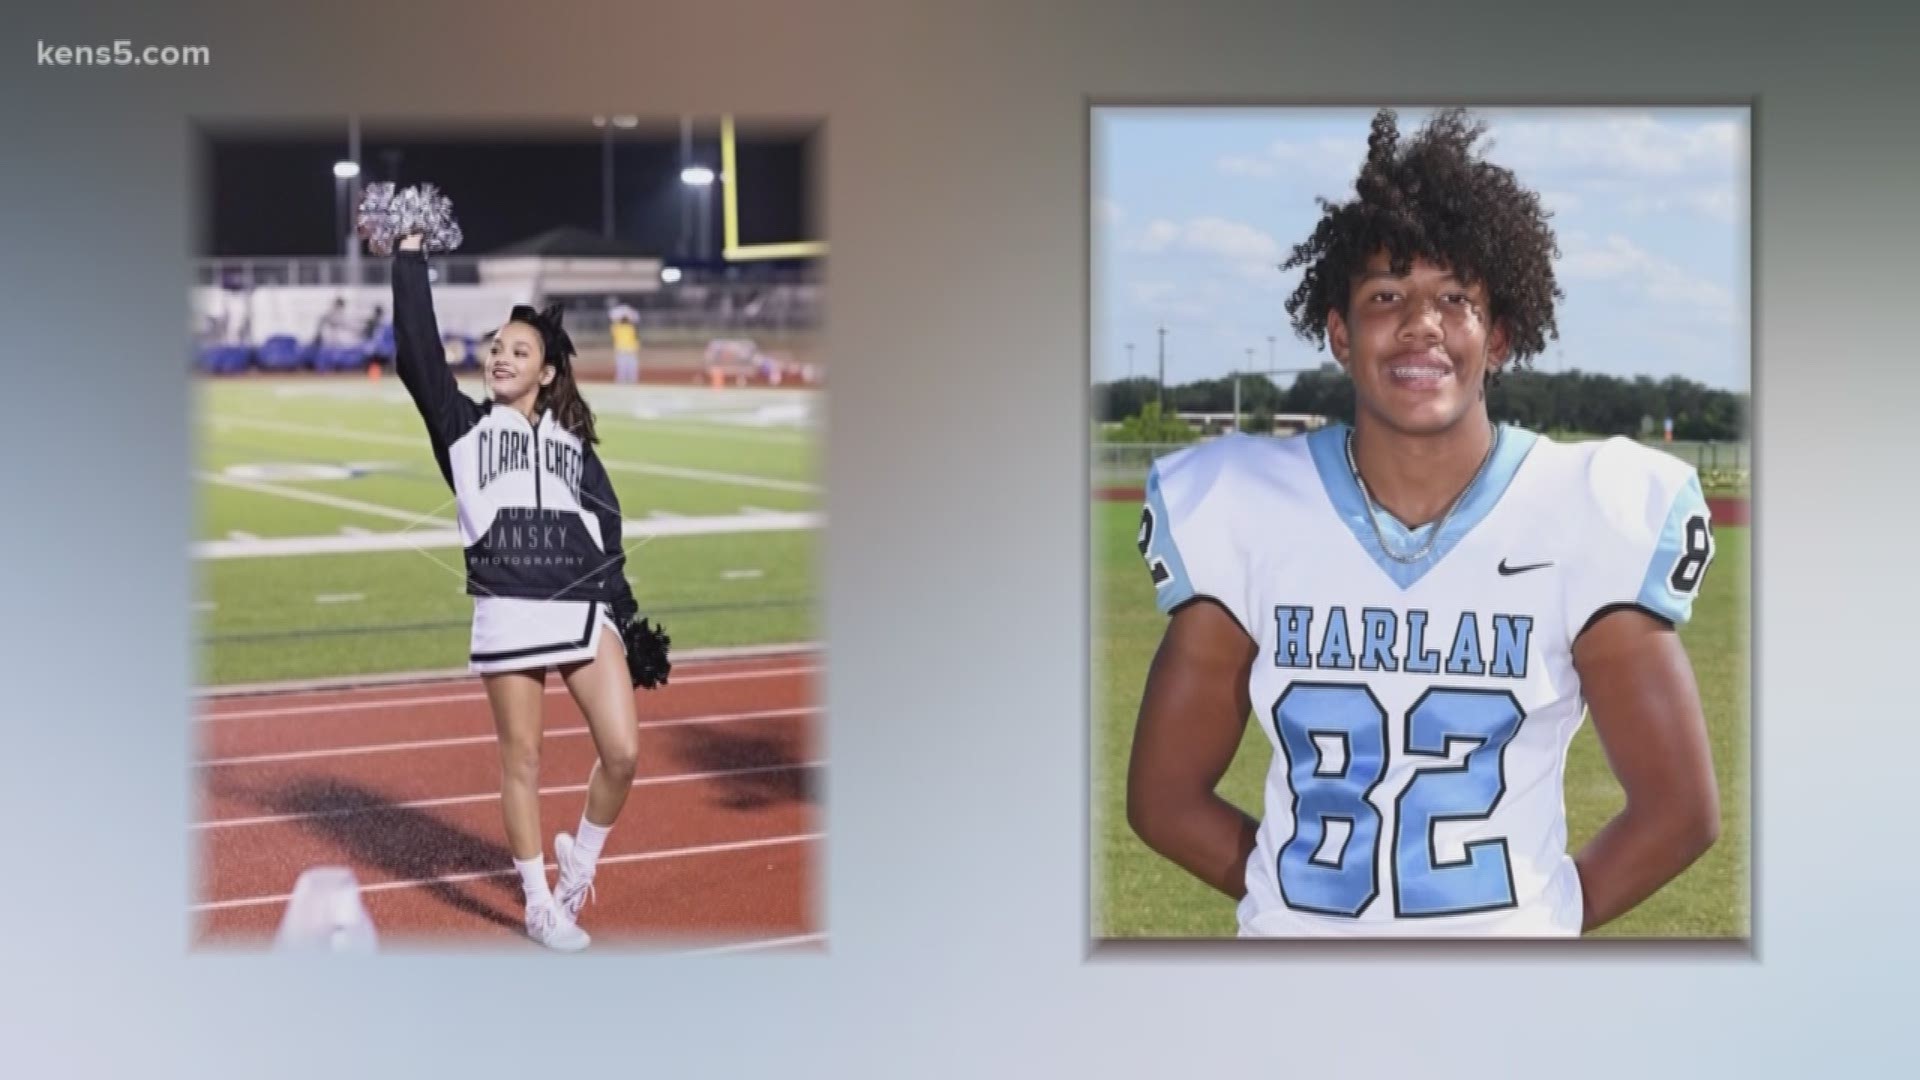 School staff braced themselves as students returned to class, remembering both friends they've lost. Eyewitness News reporter Adi Guajardo spoke with a student close to both teens killed.